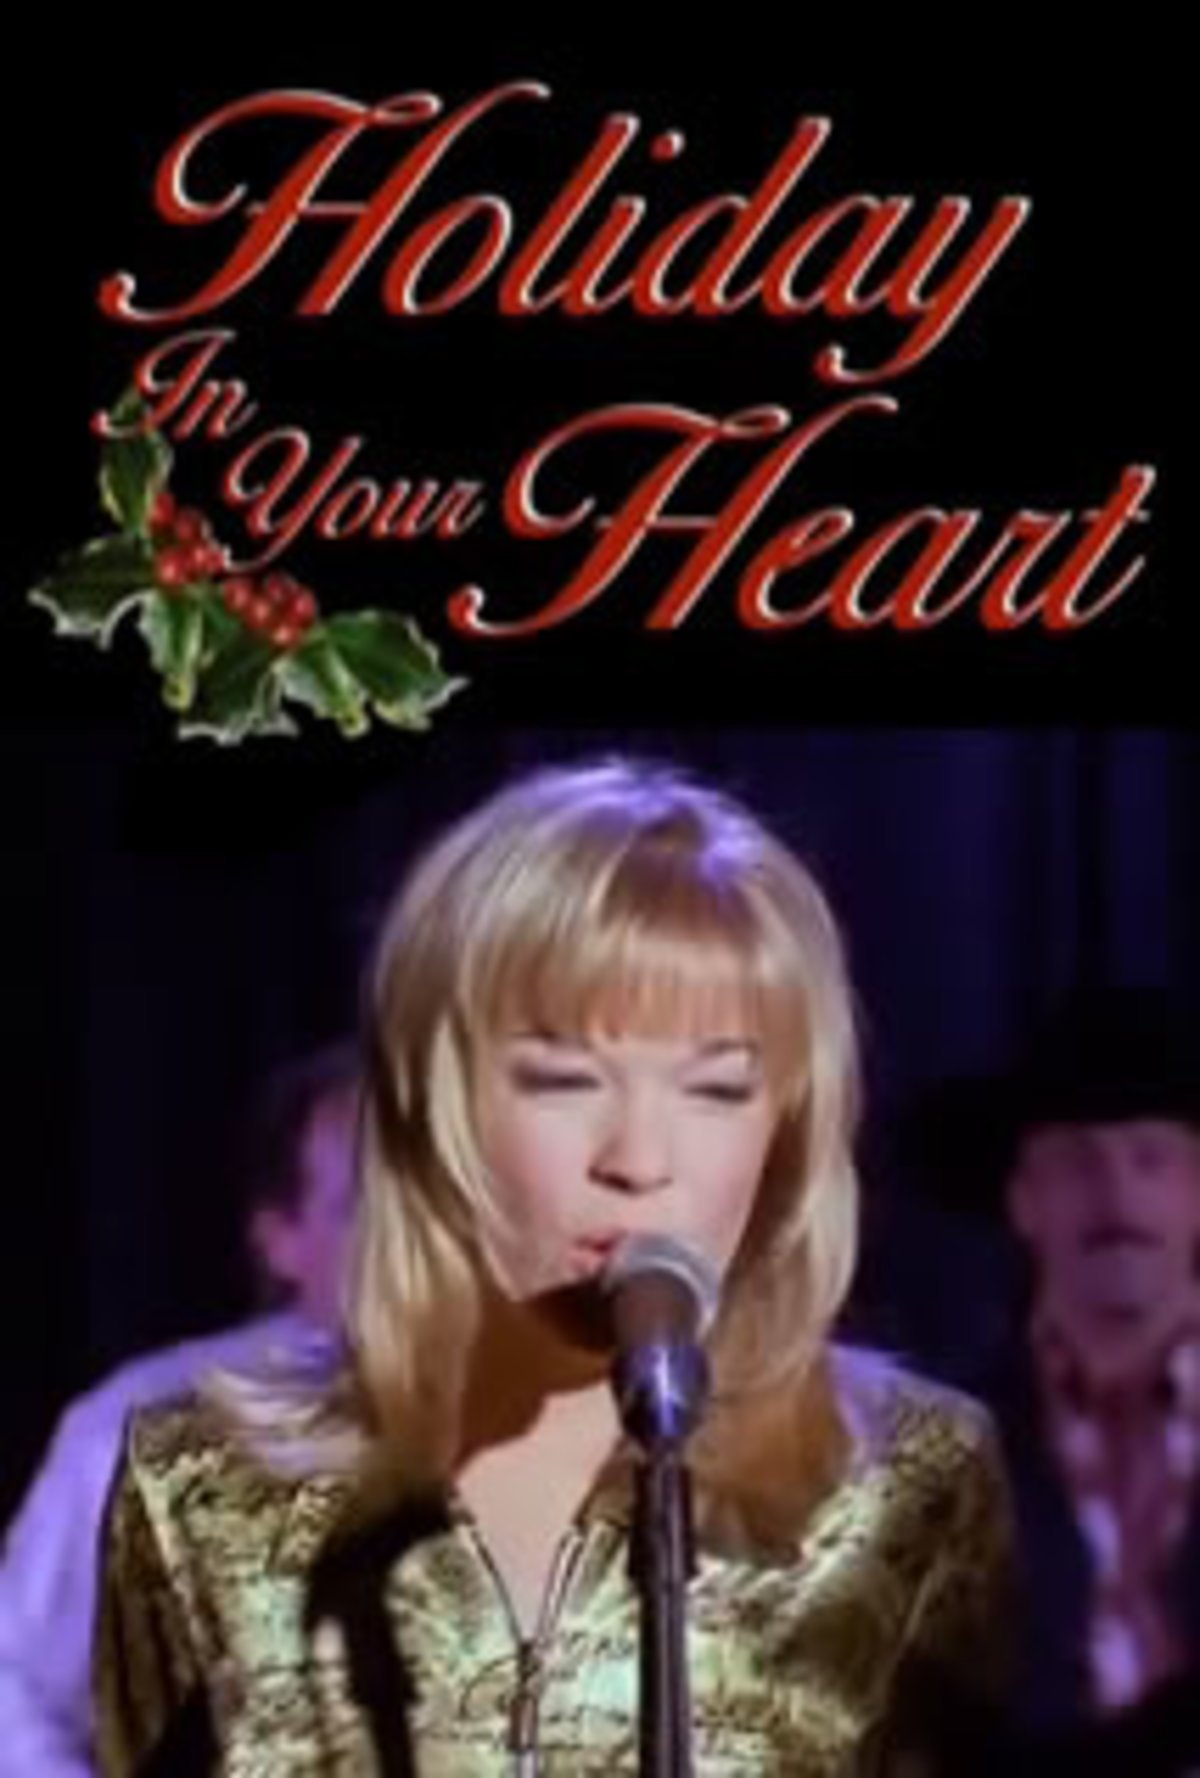 Holiday in Your Heart (1997) Screenshot 1 